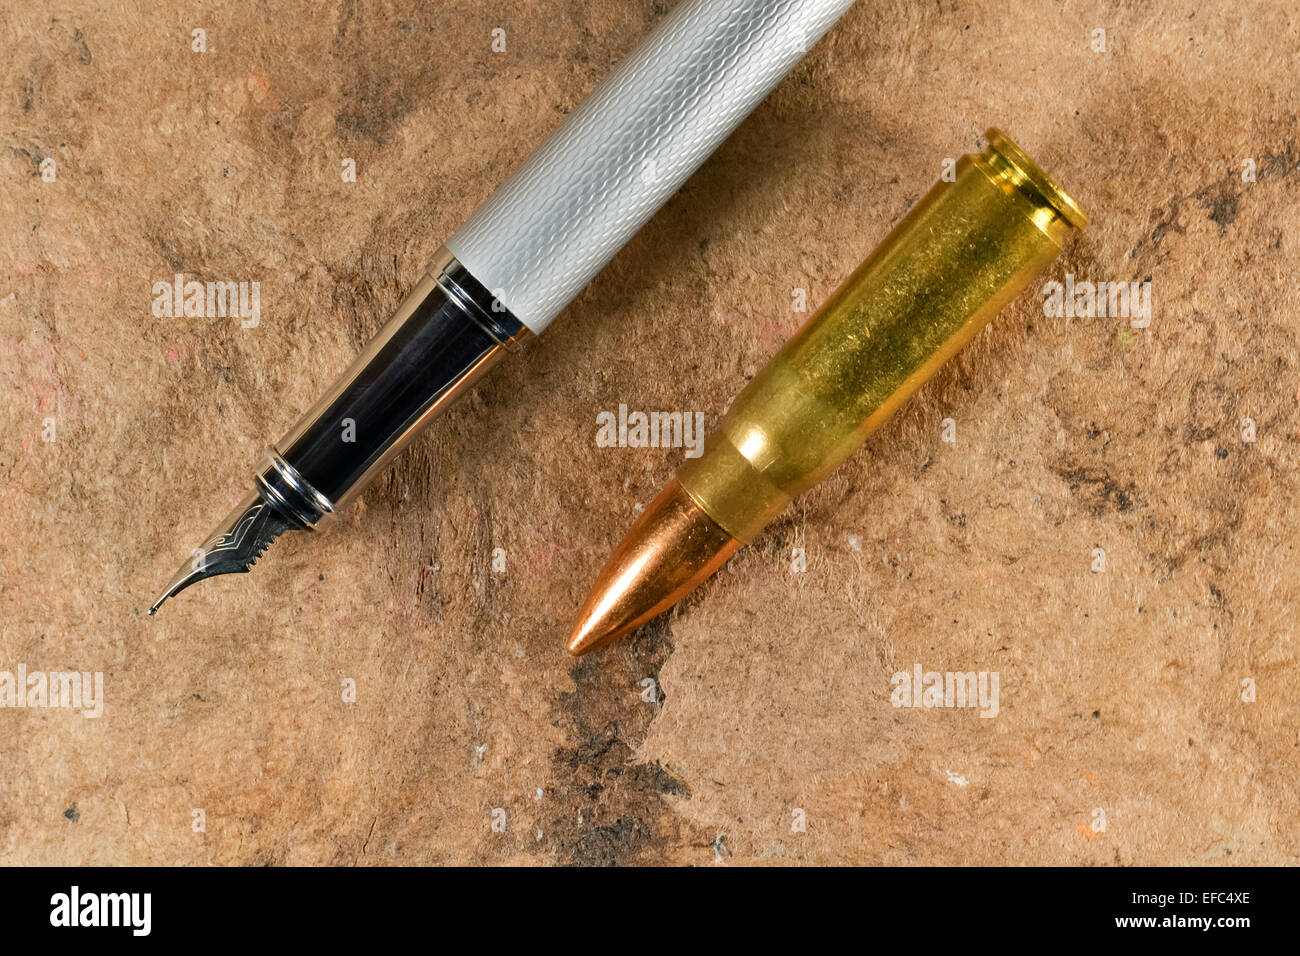 Fountain pen and a bullet in a parallel position on vintage background Stock Photo